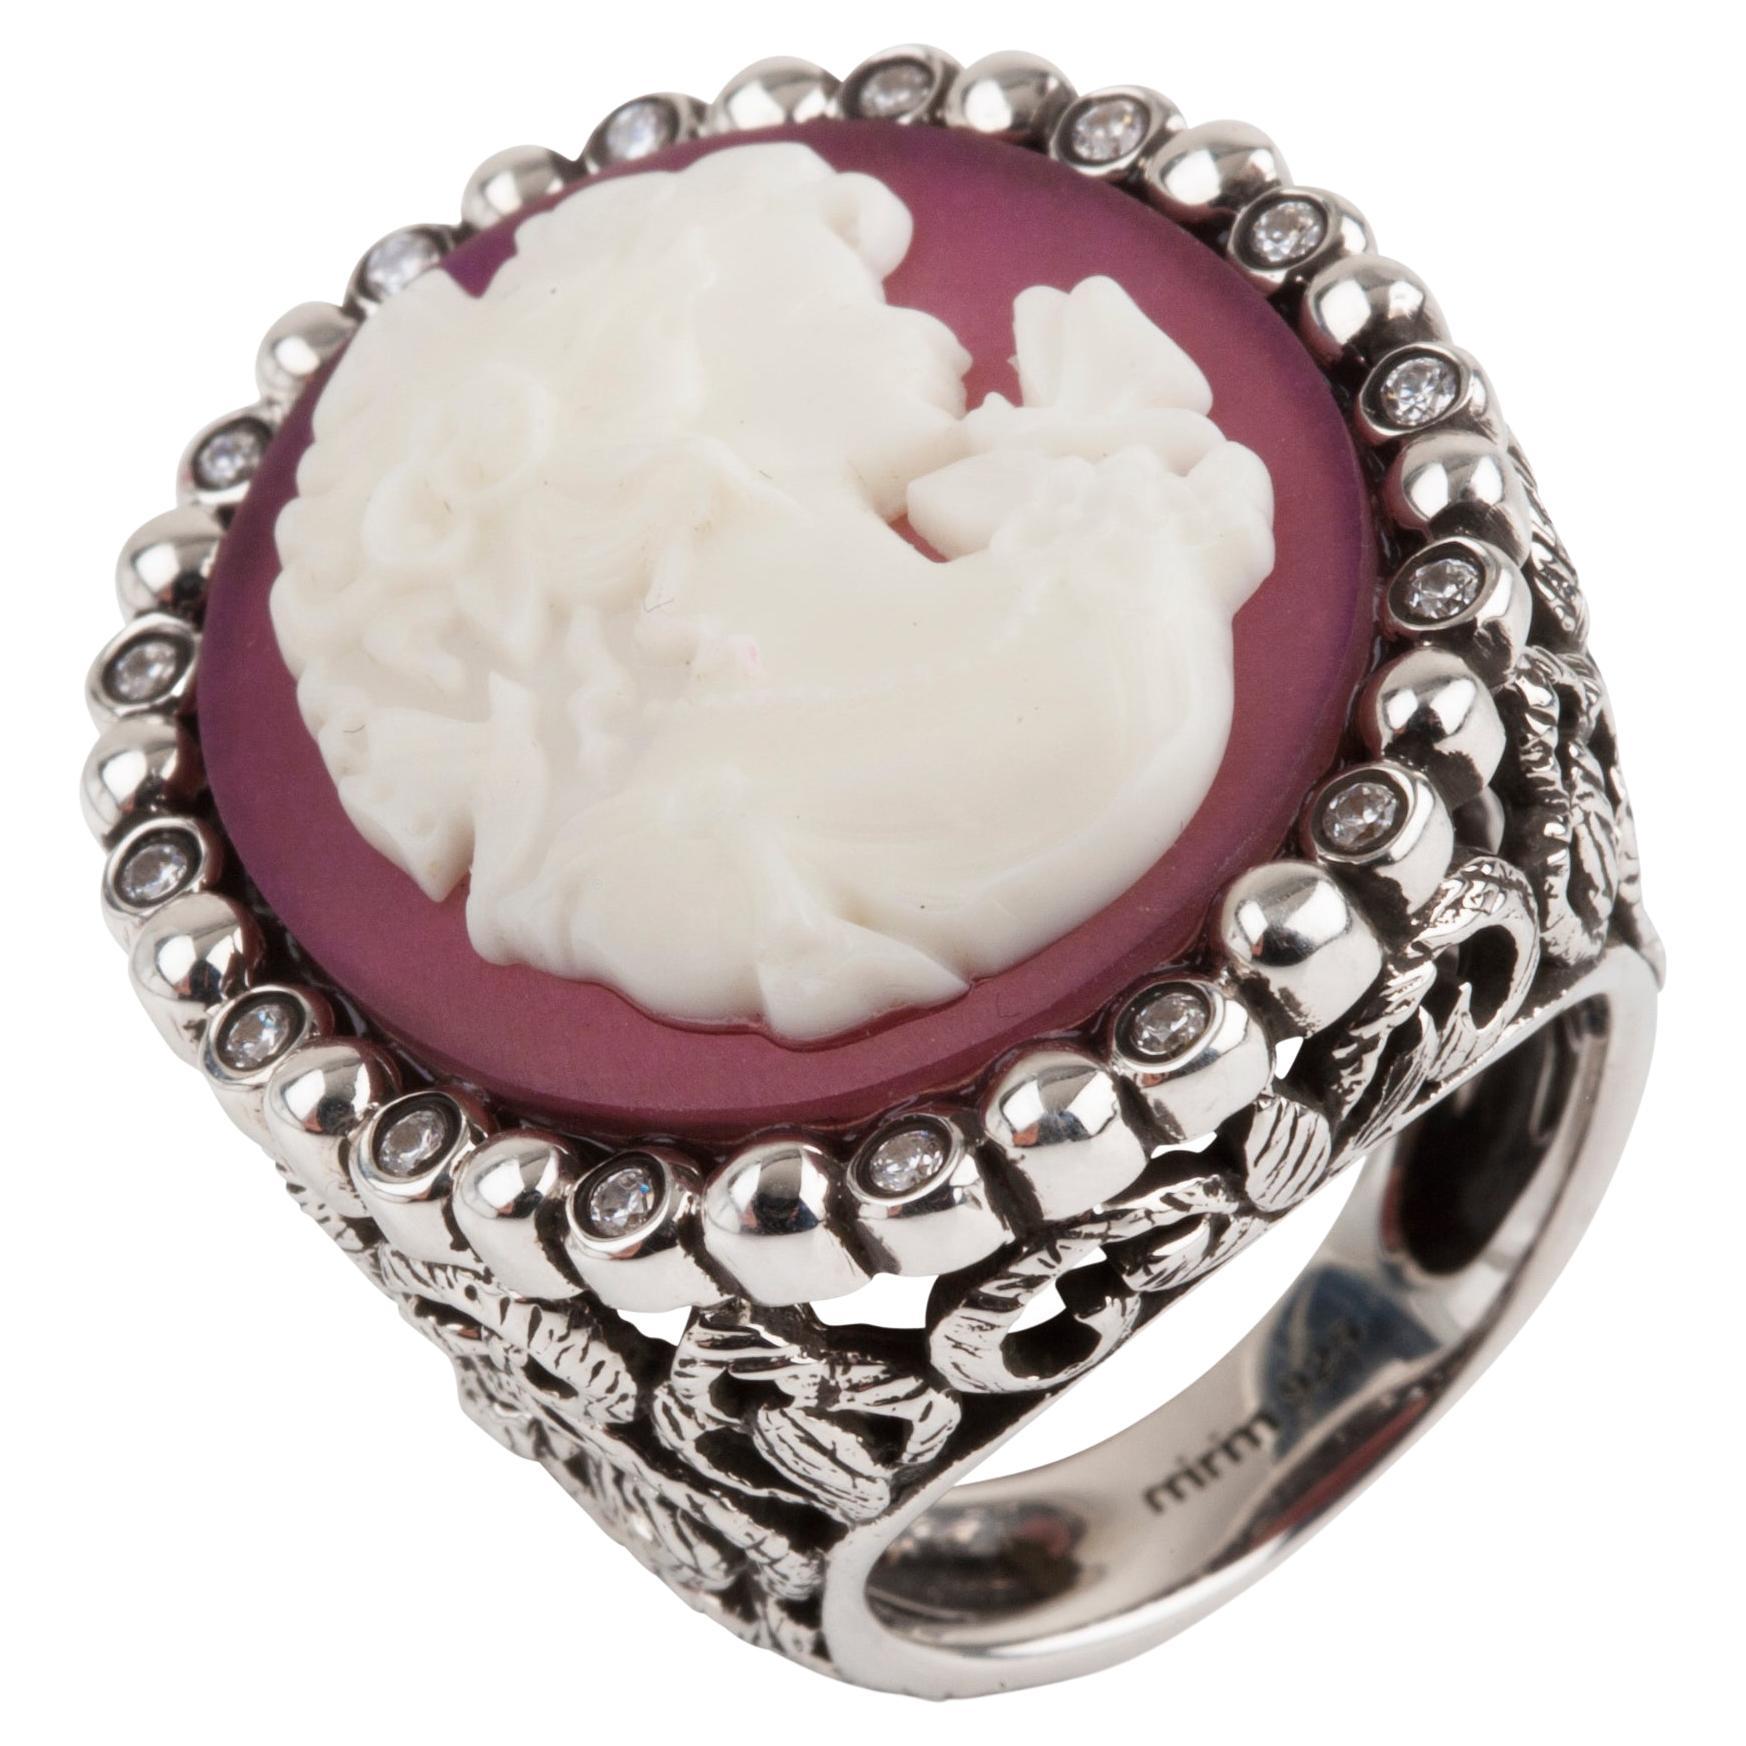 Miriam Salat Cameo Ring with White Topaz and Resin 